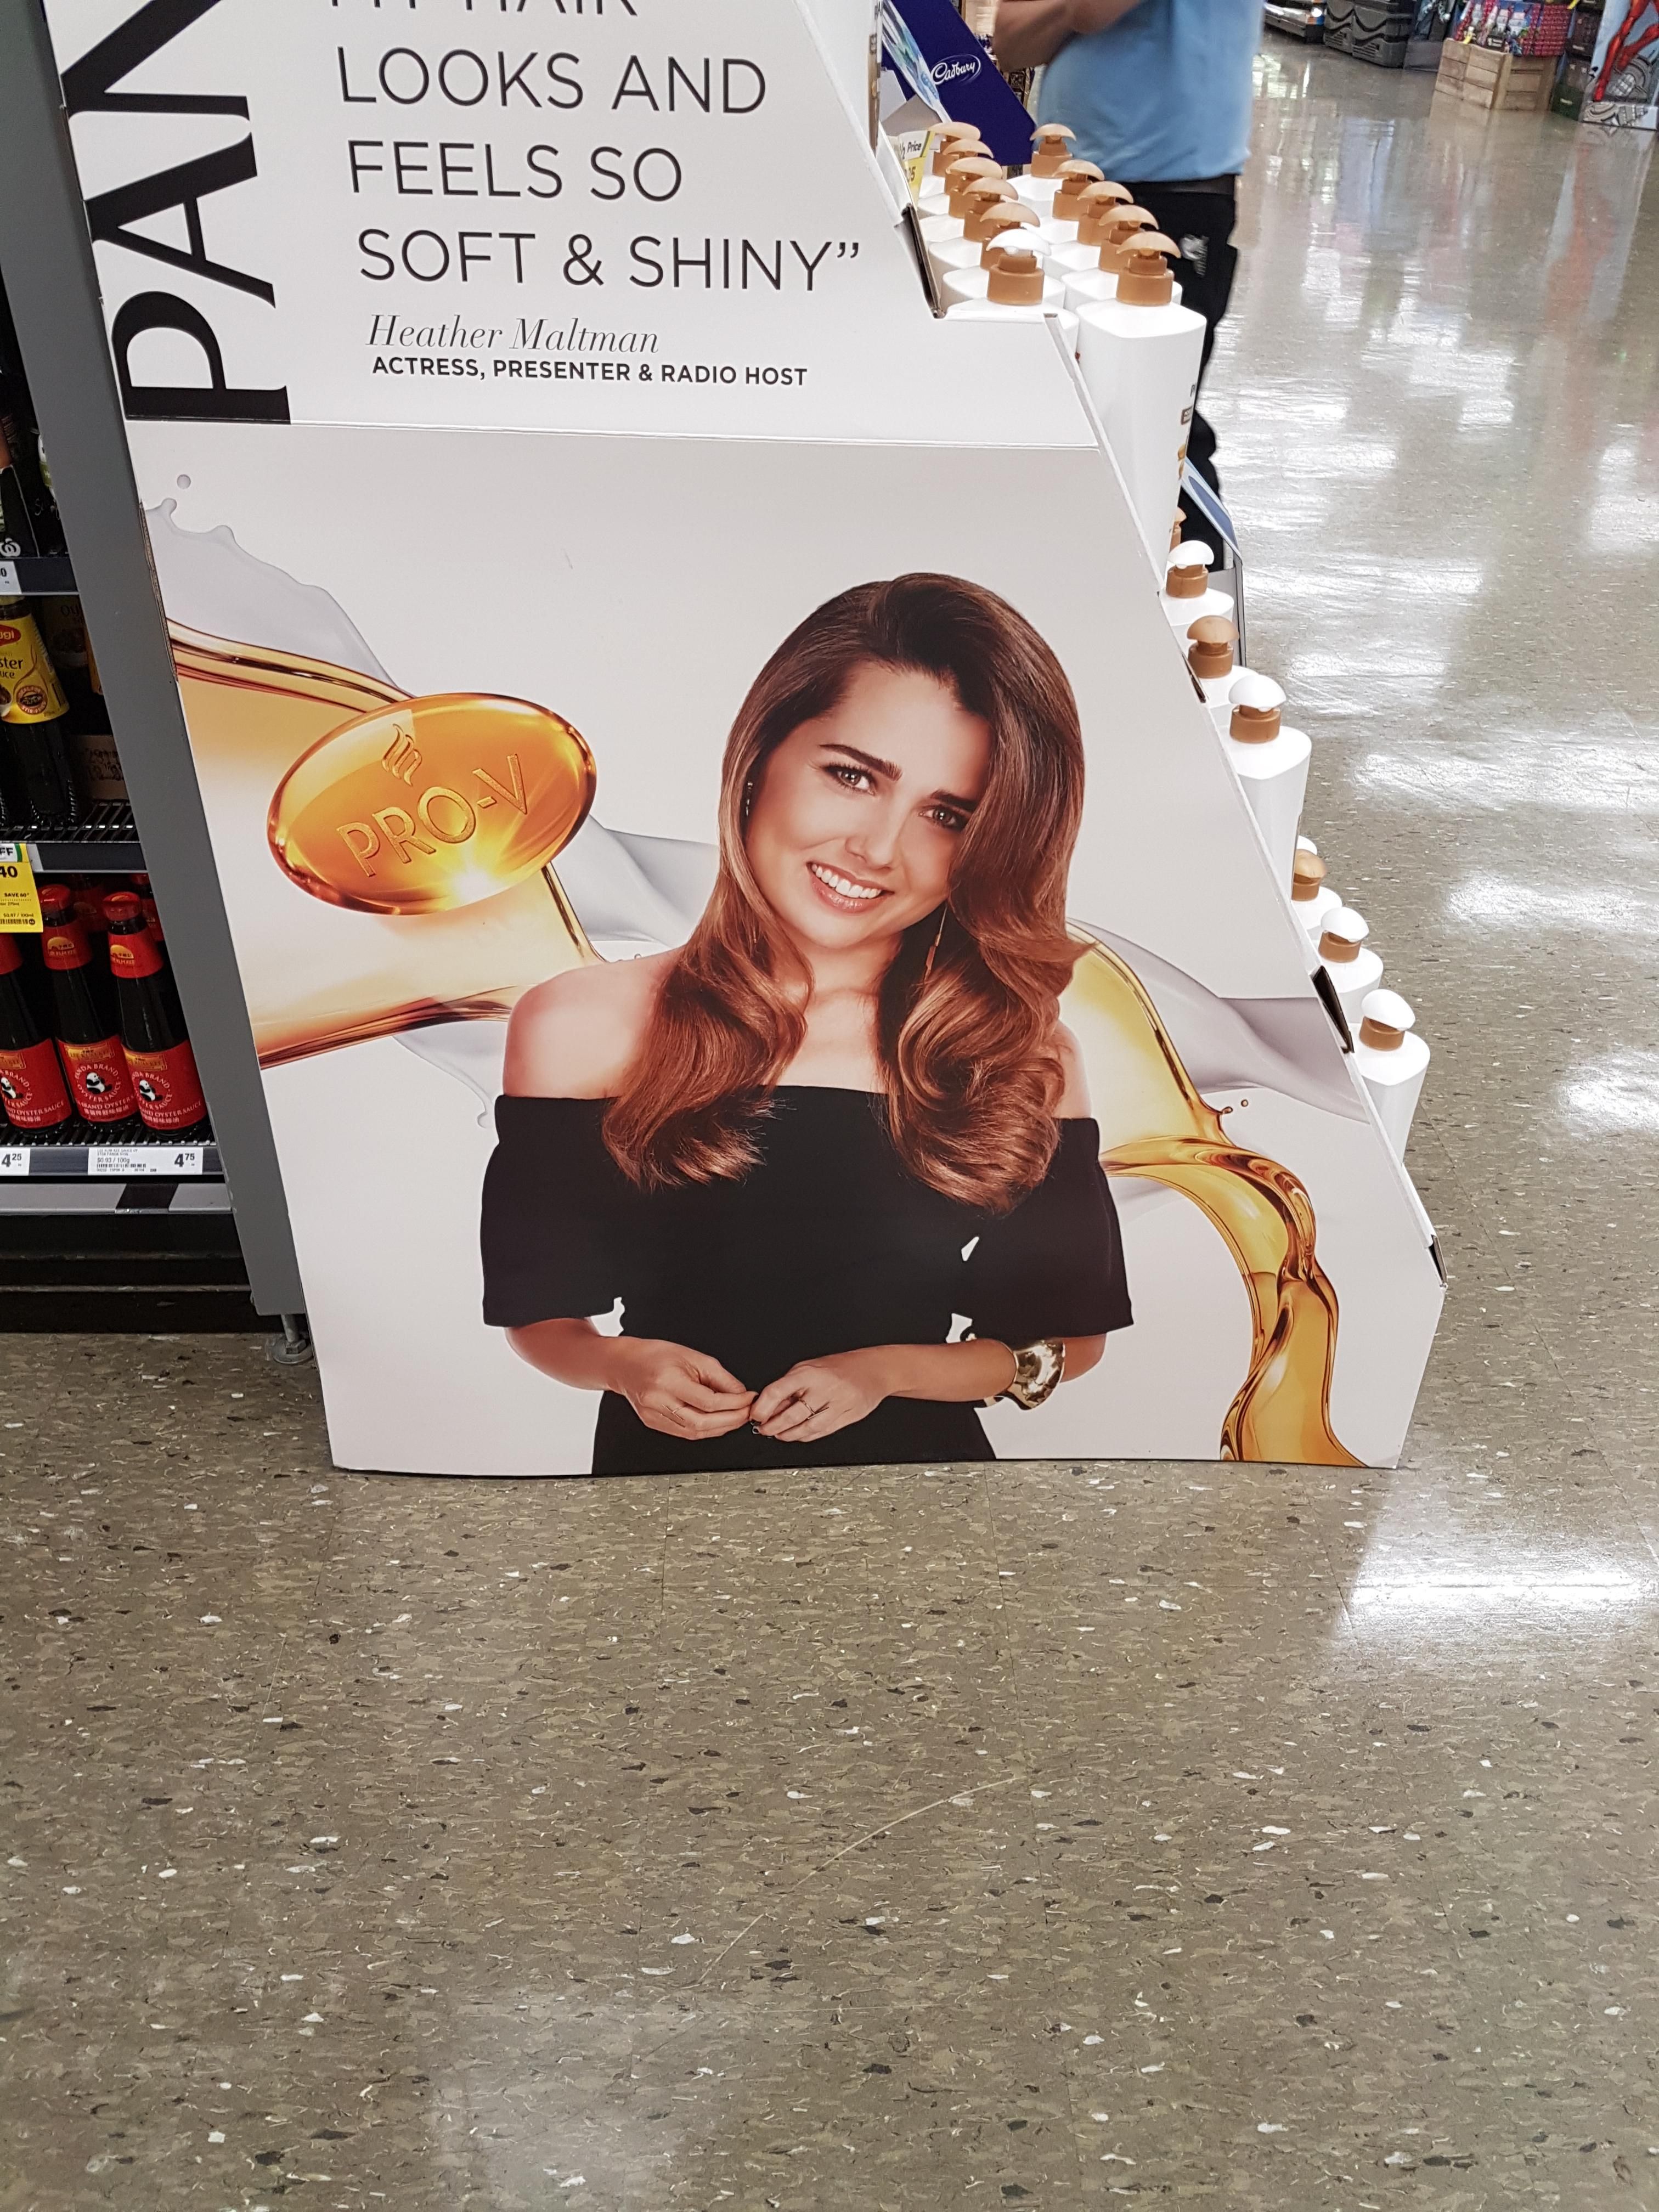 This Pantene model looks like she's about to break up with me